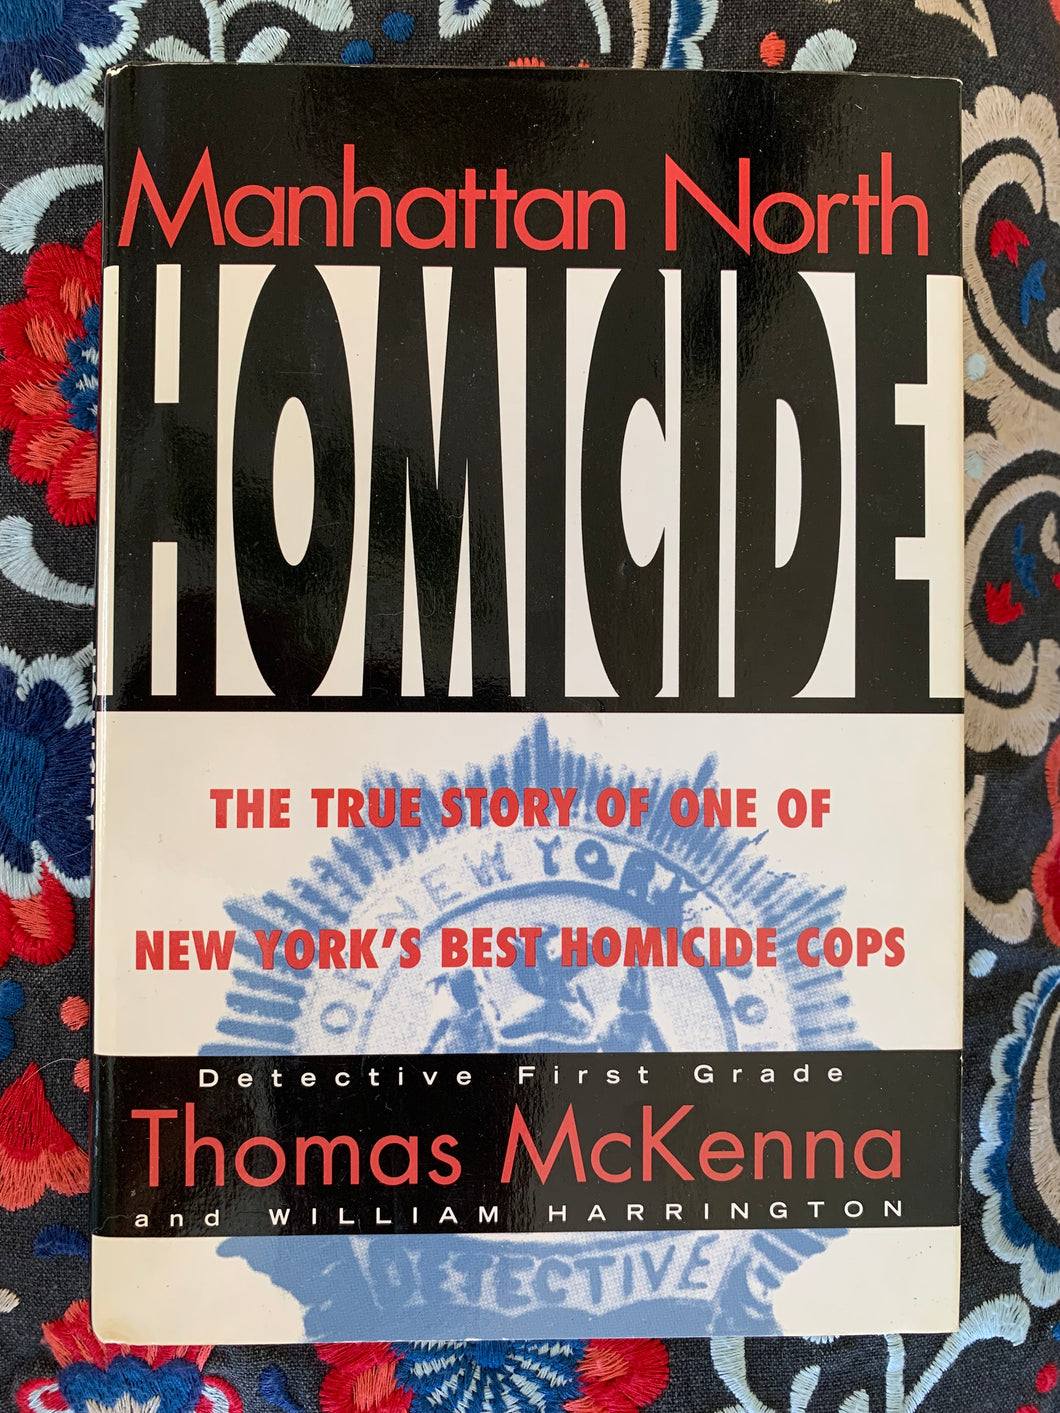 Manhattan North Homicide: The True Story Of One Of New York's Best Homicide Cops